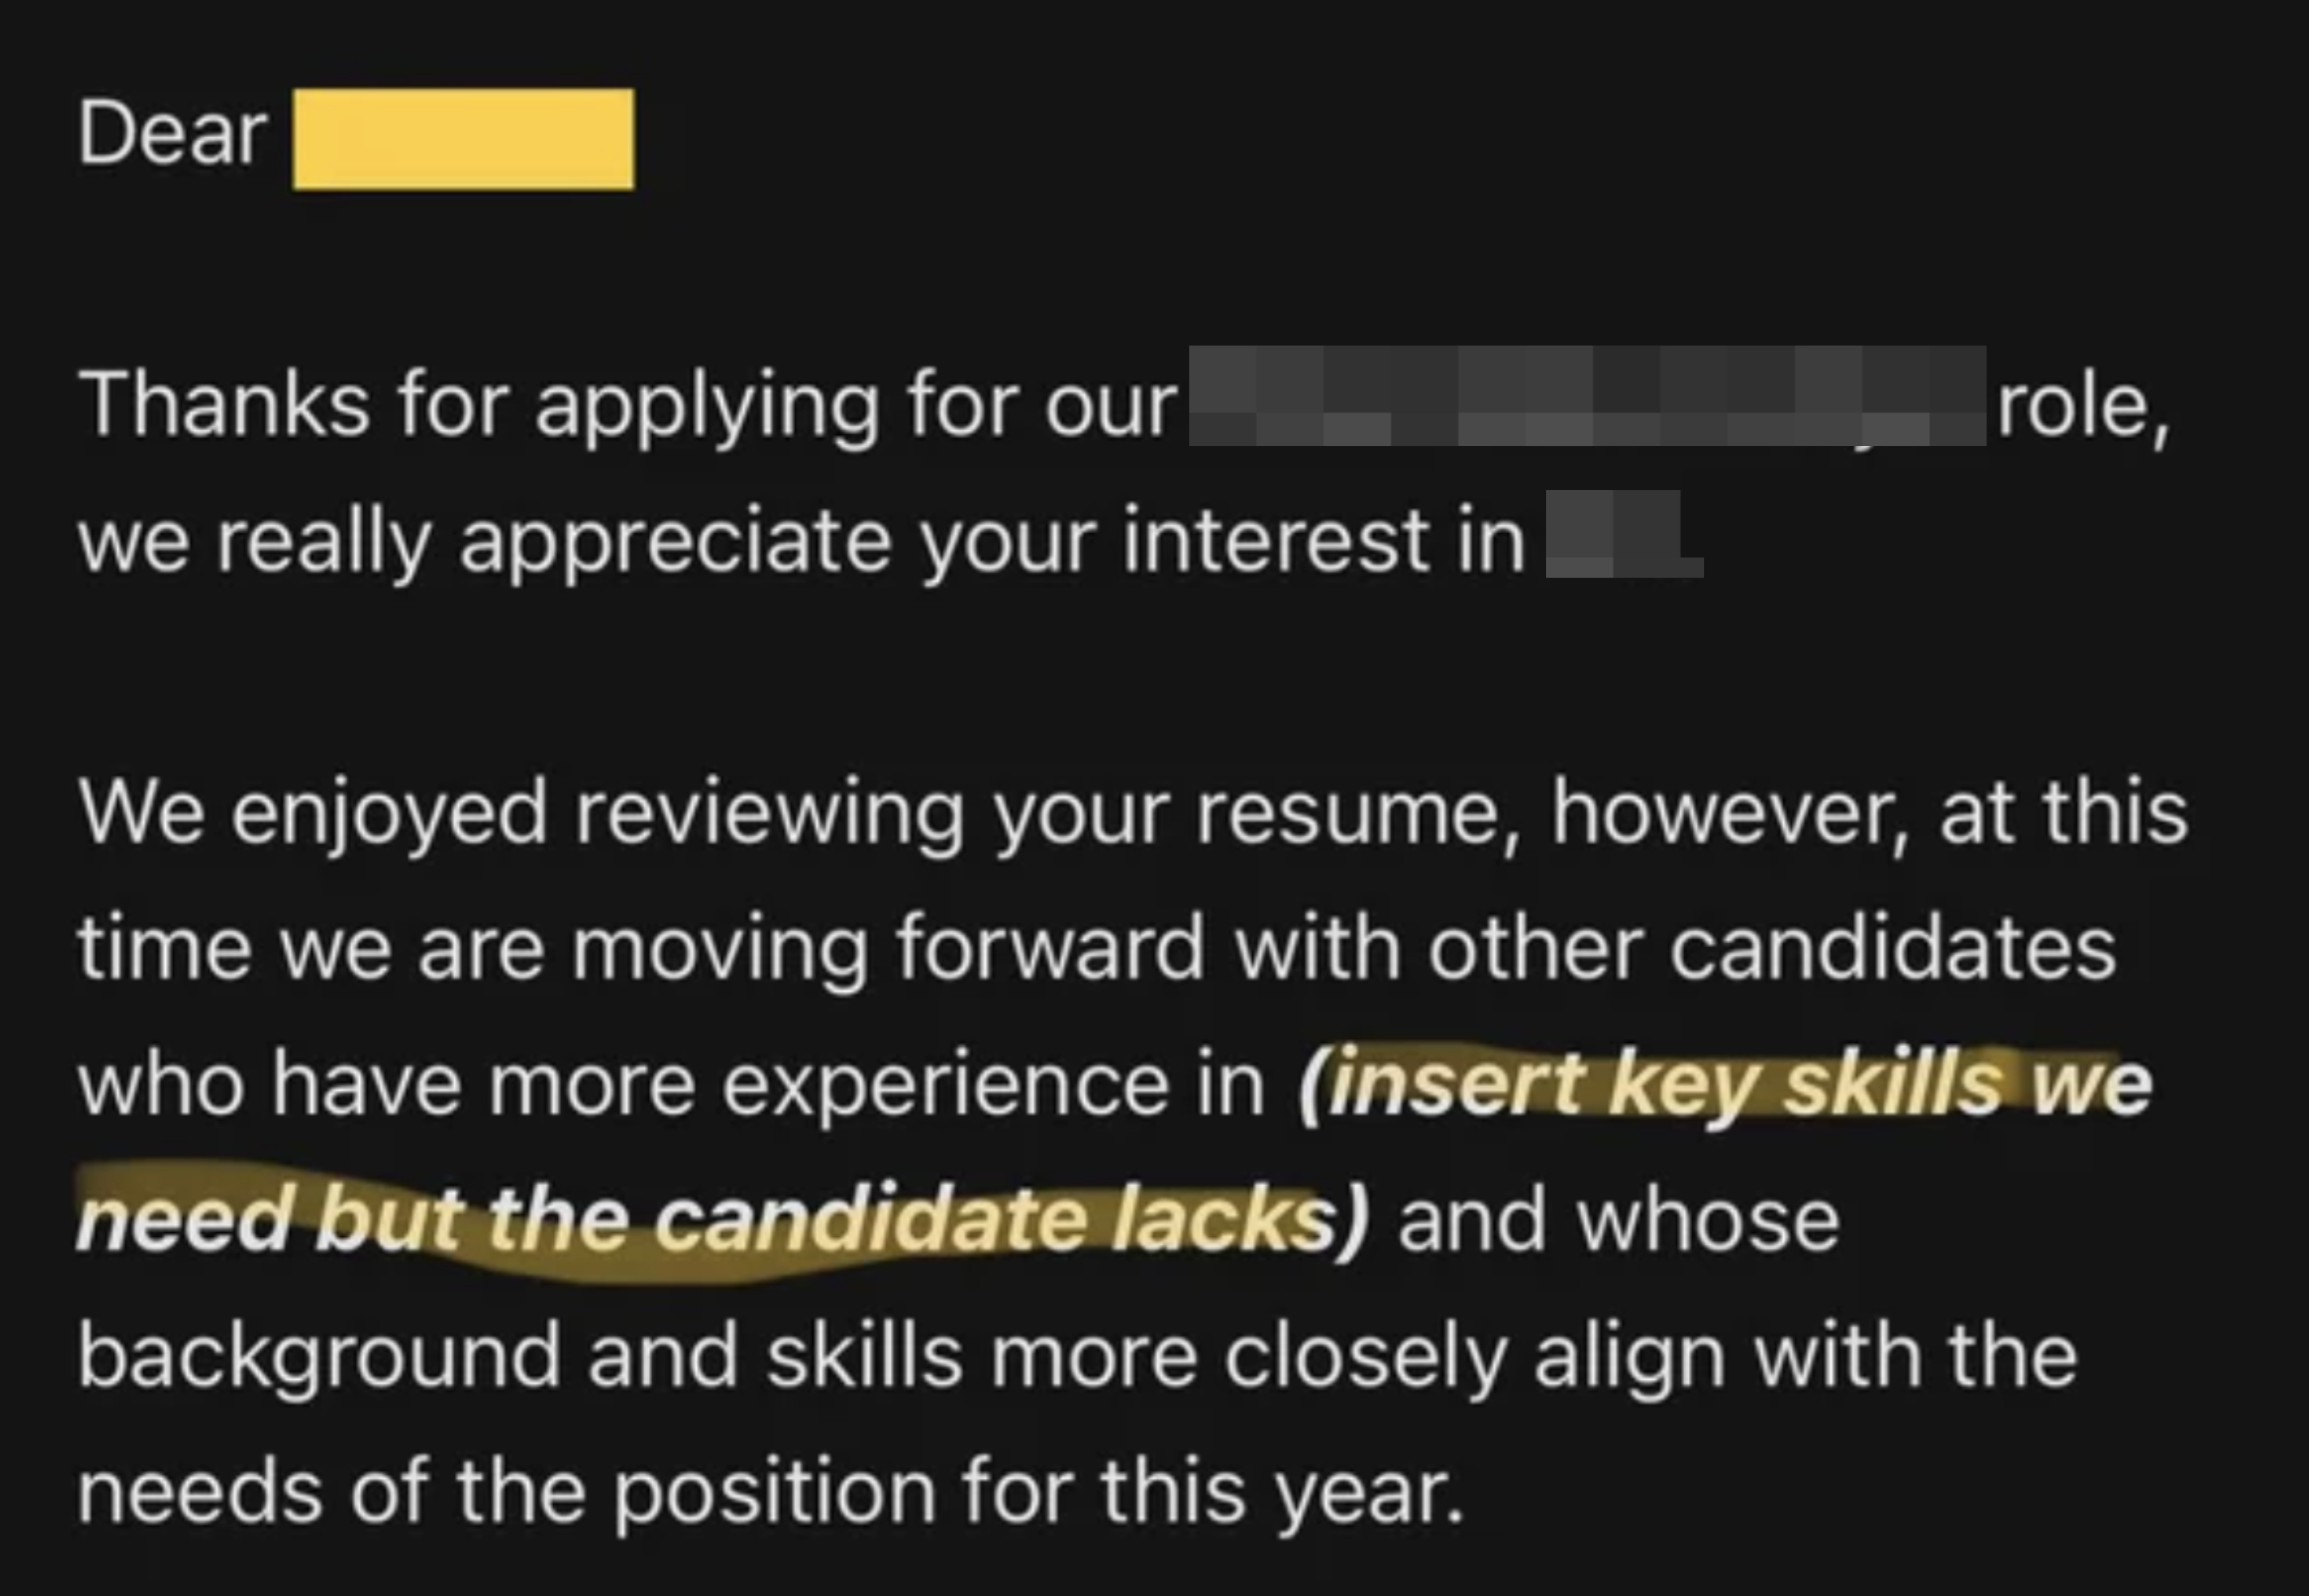 &quot;insert skills we need but the candidate lacks&quot;